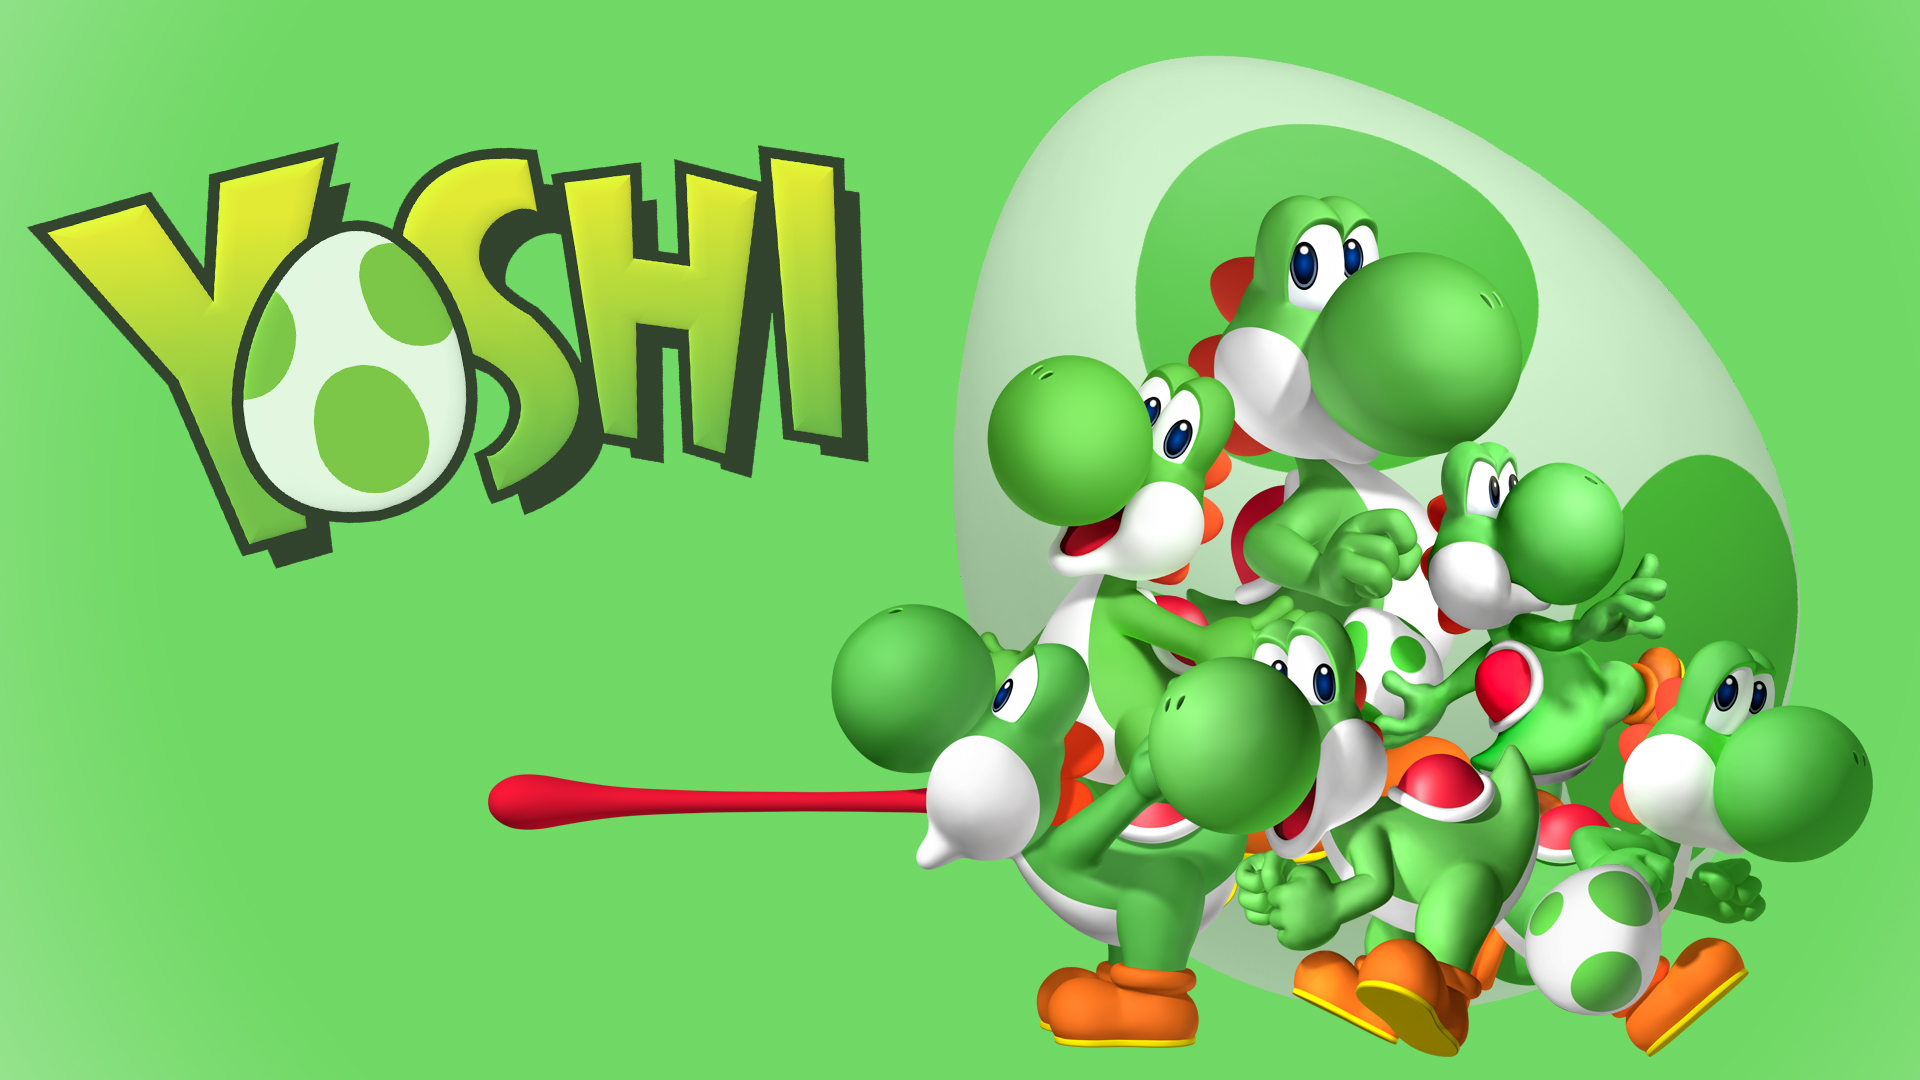 Games Zupertompa Here Is A Yoshi Wallpaper For All You